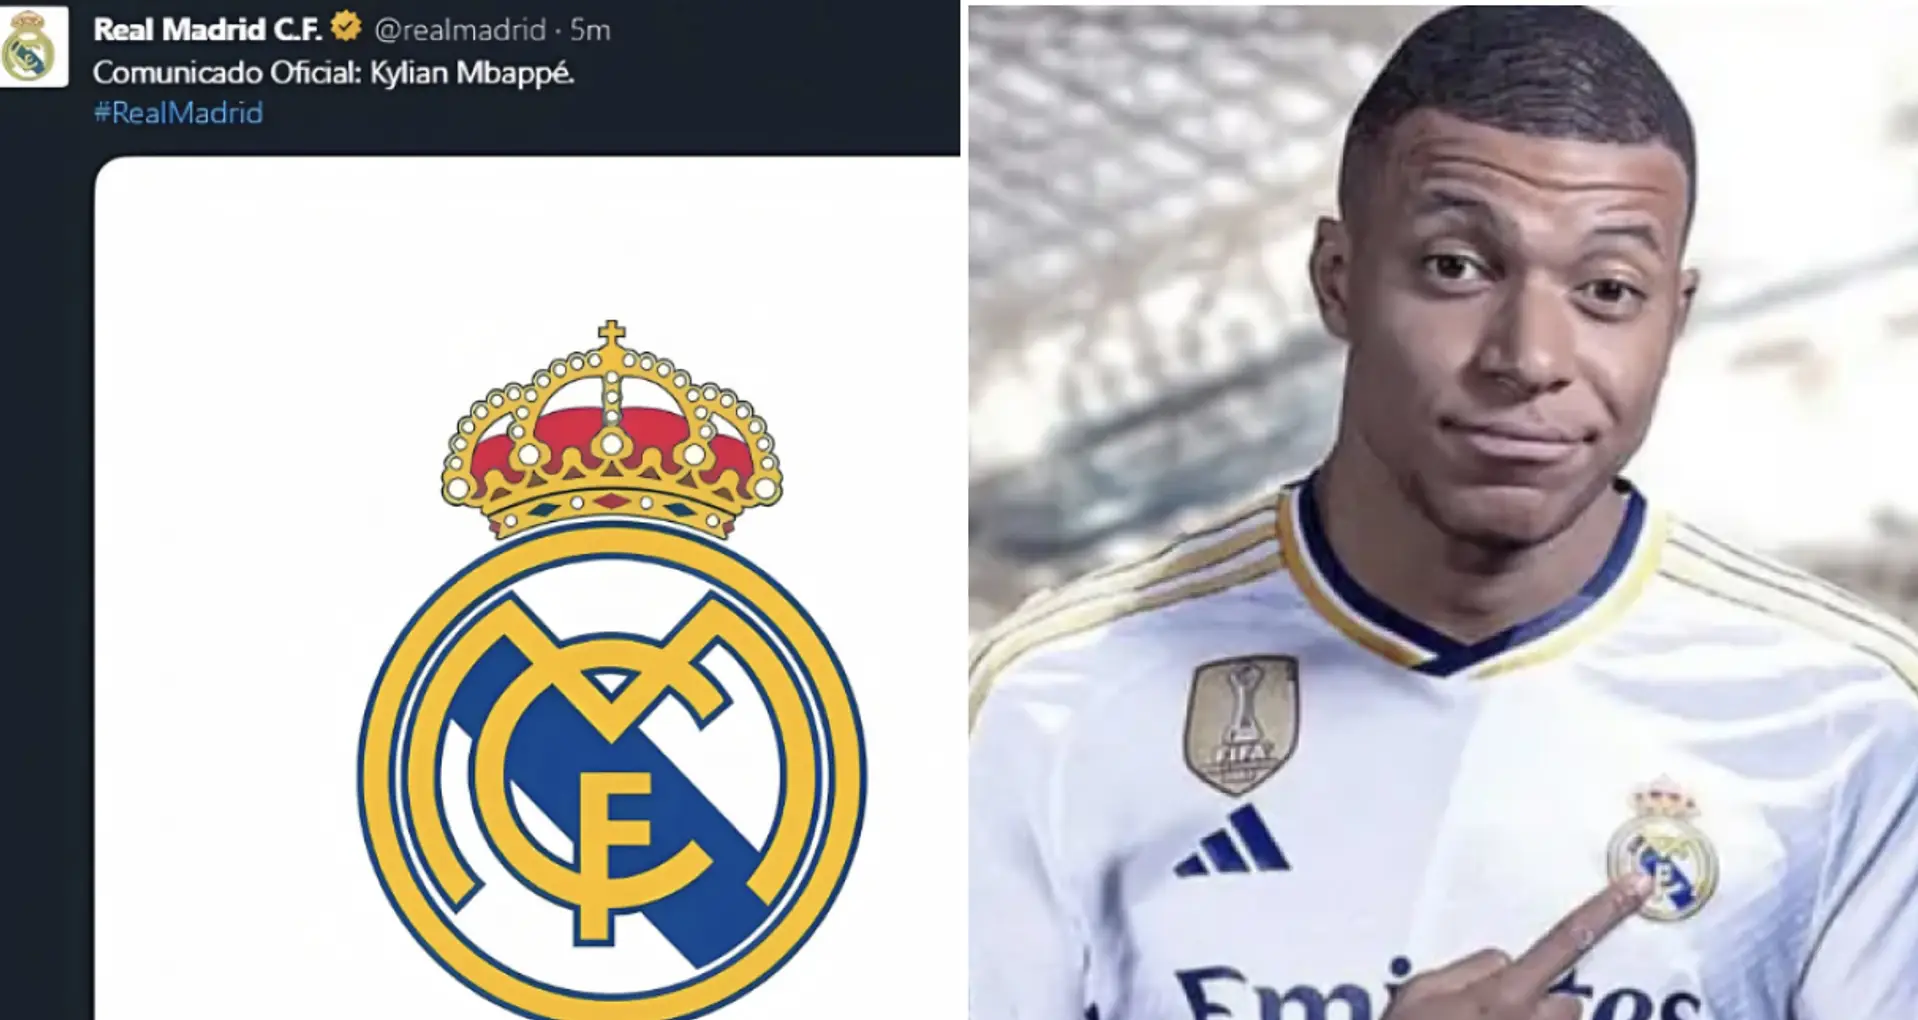 Real Madrid release Comunicado Oficial on Kylian Mbappe